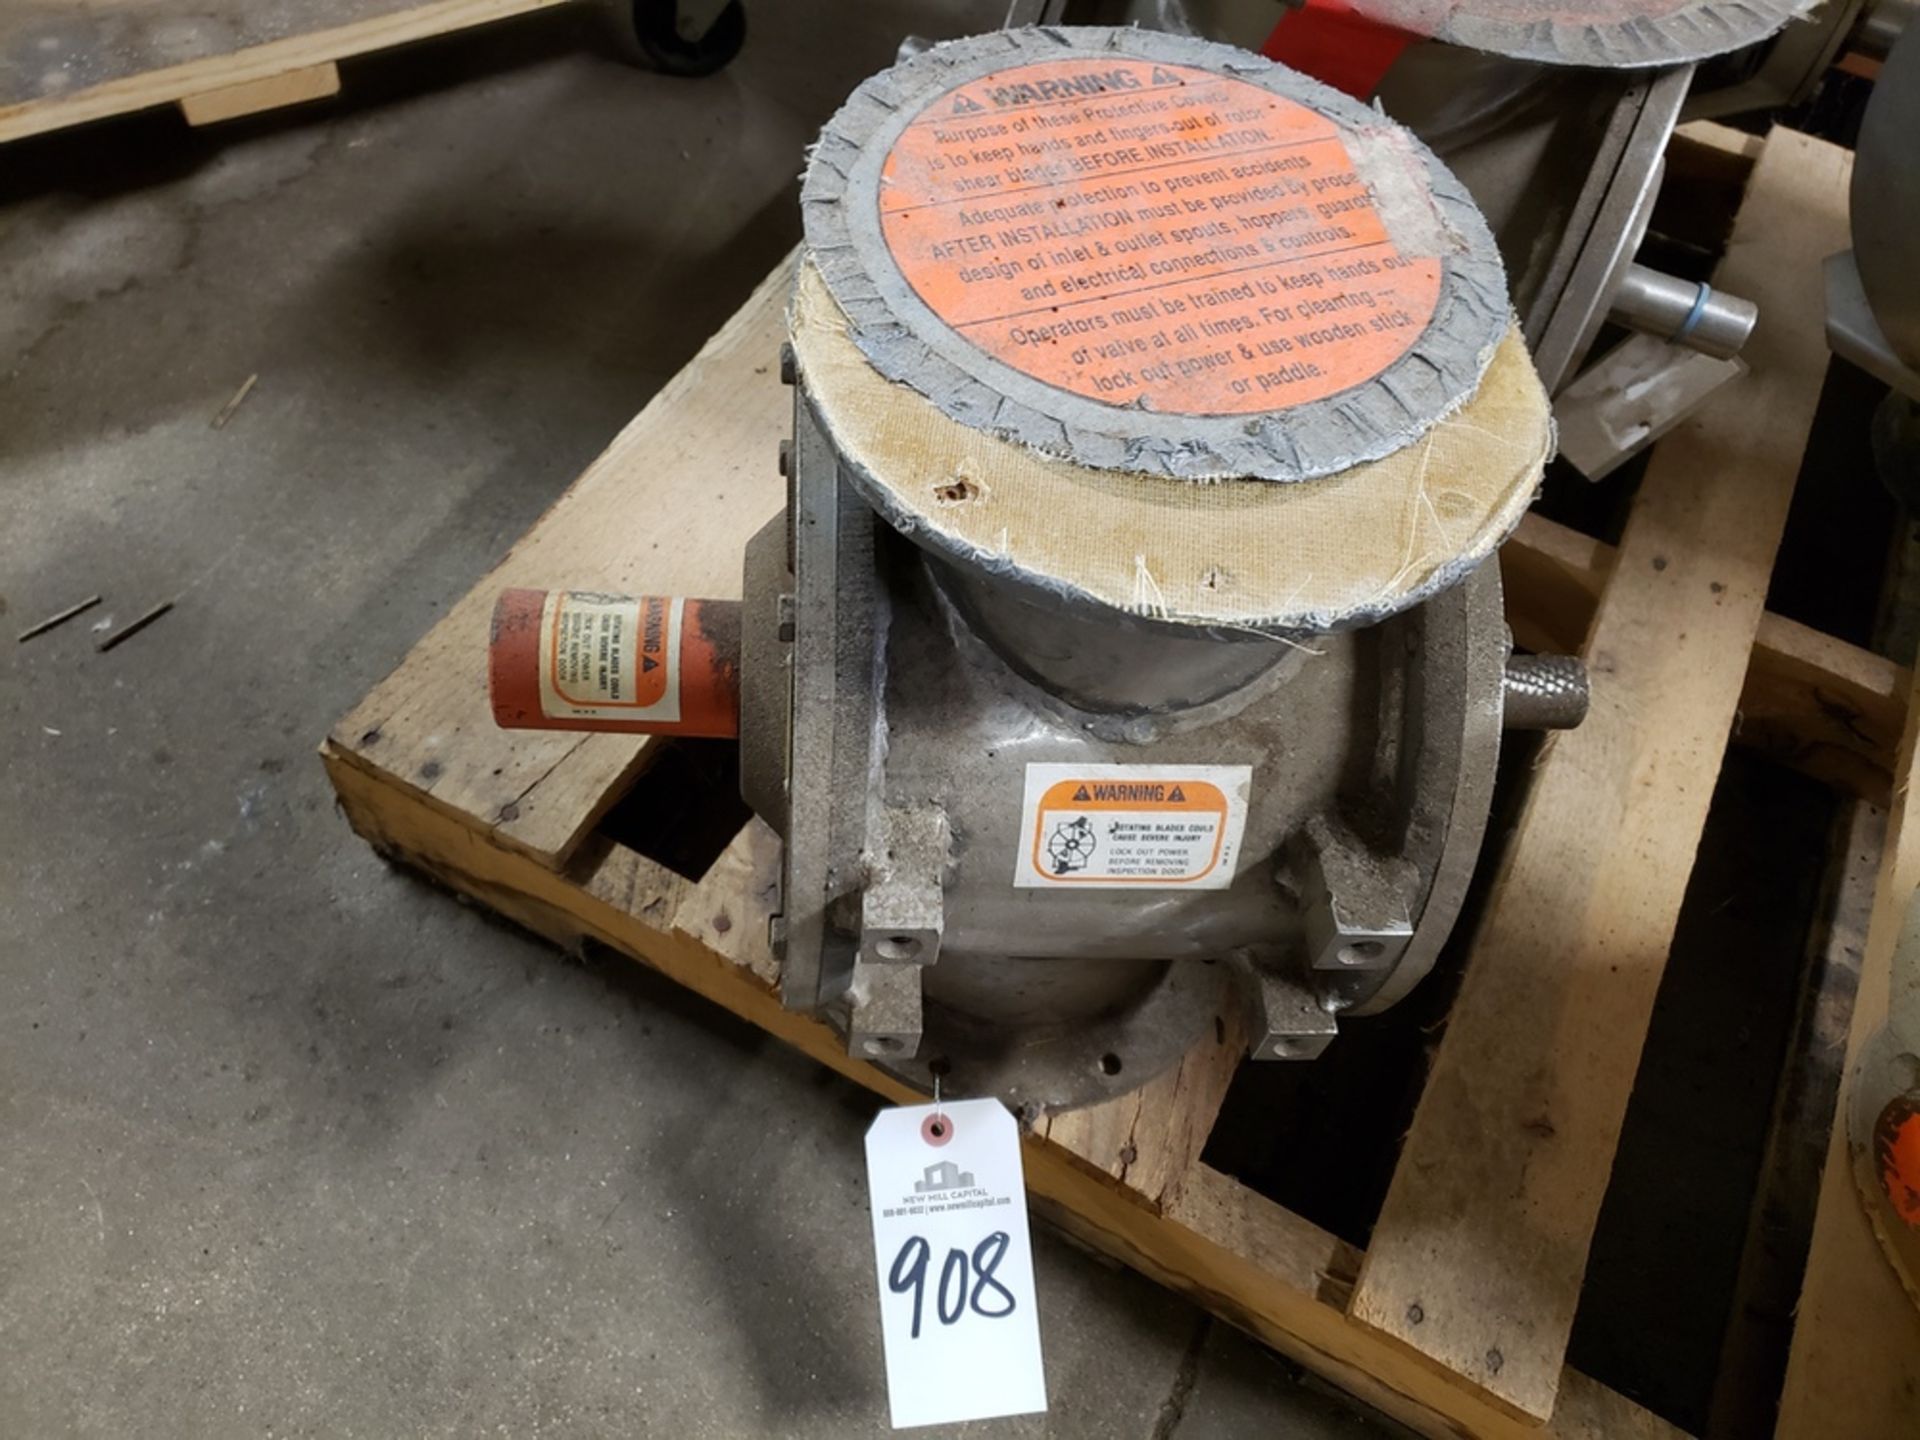 Kice Rotary Valve, M# VBS 8X6 - Subject to Bulk Bid Lot 884B -The Greater of t | Rig Fee: No Charge